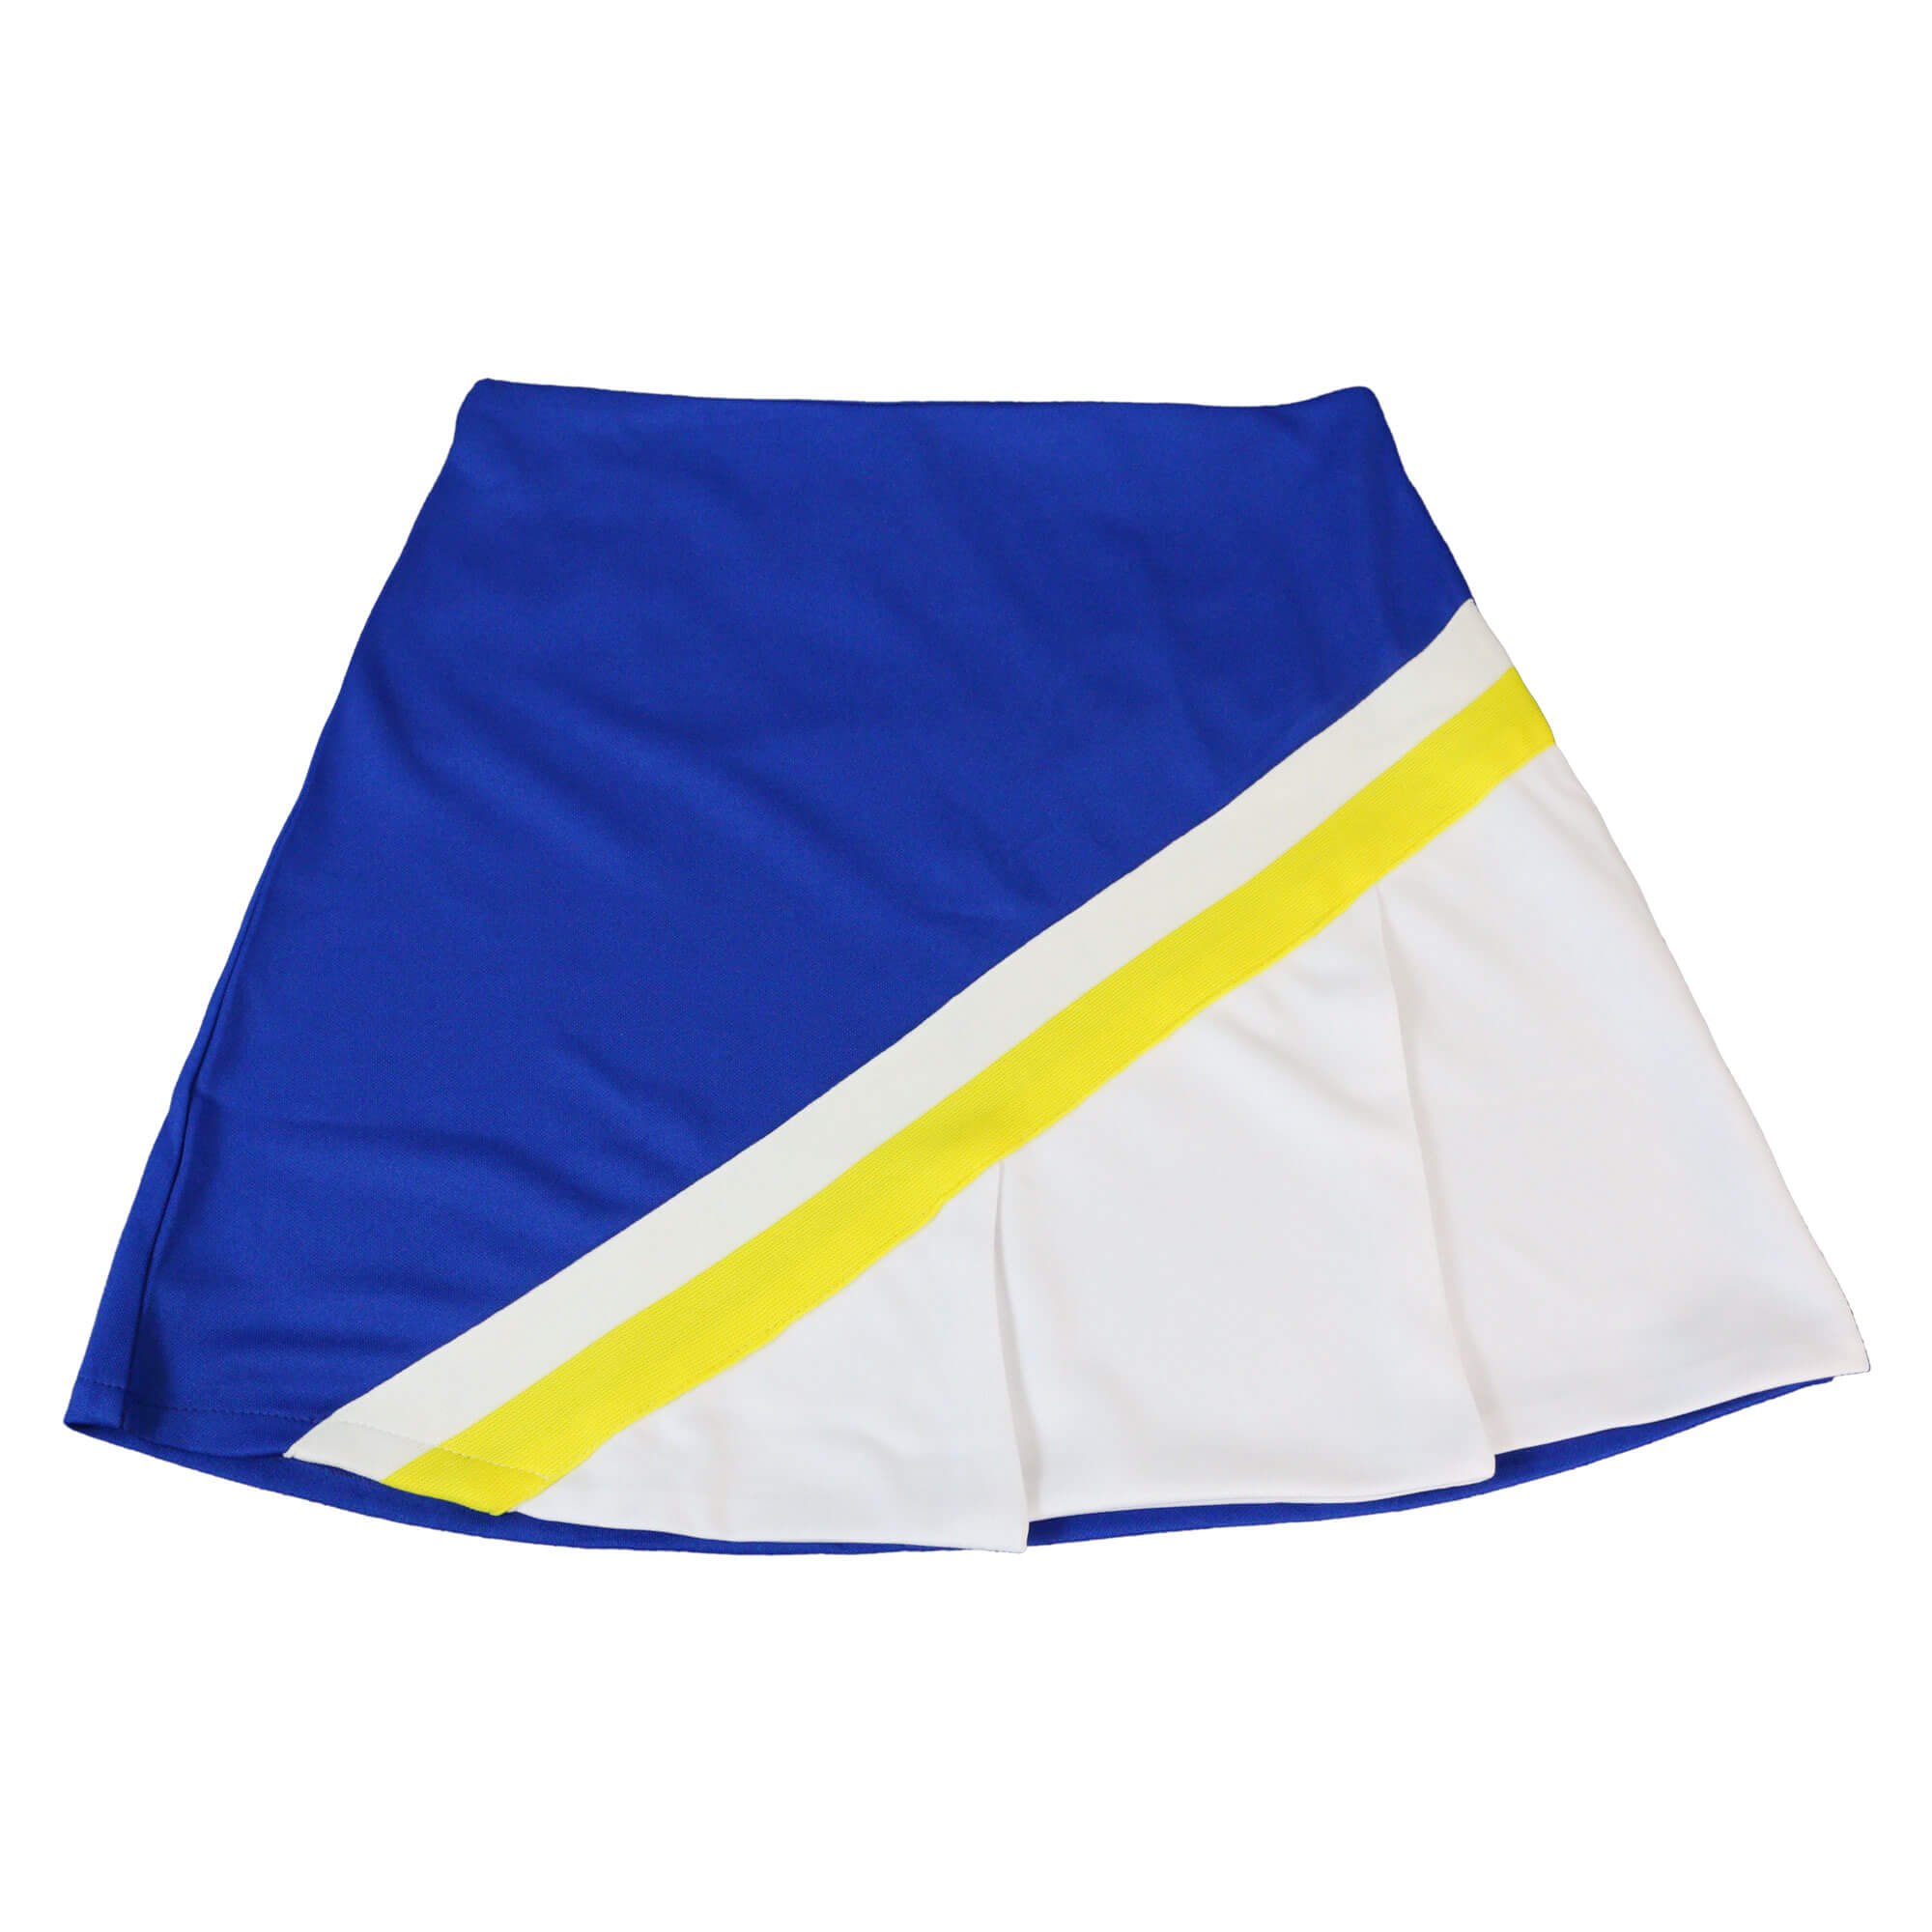 Danzcue Adult A-Line Cheerleading Knit Pleat Skirt - Click Image to Close